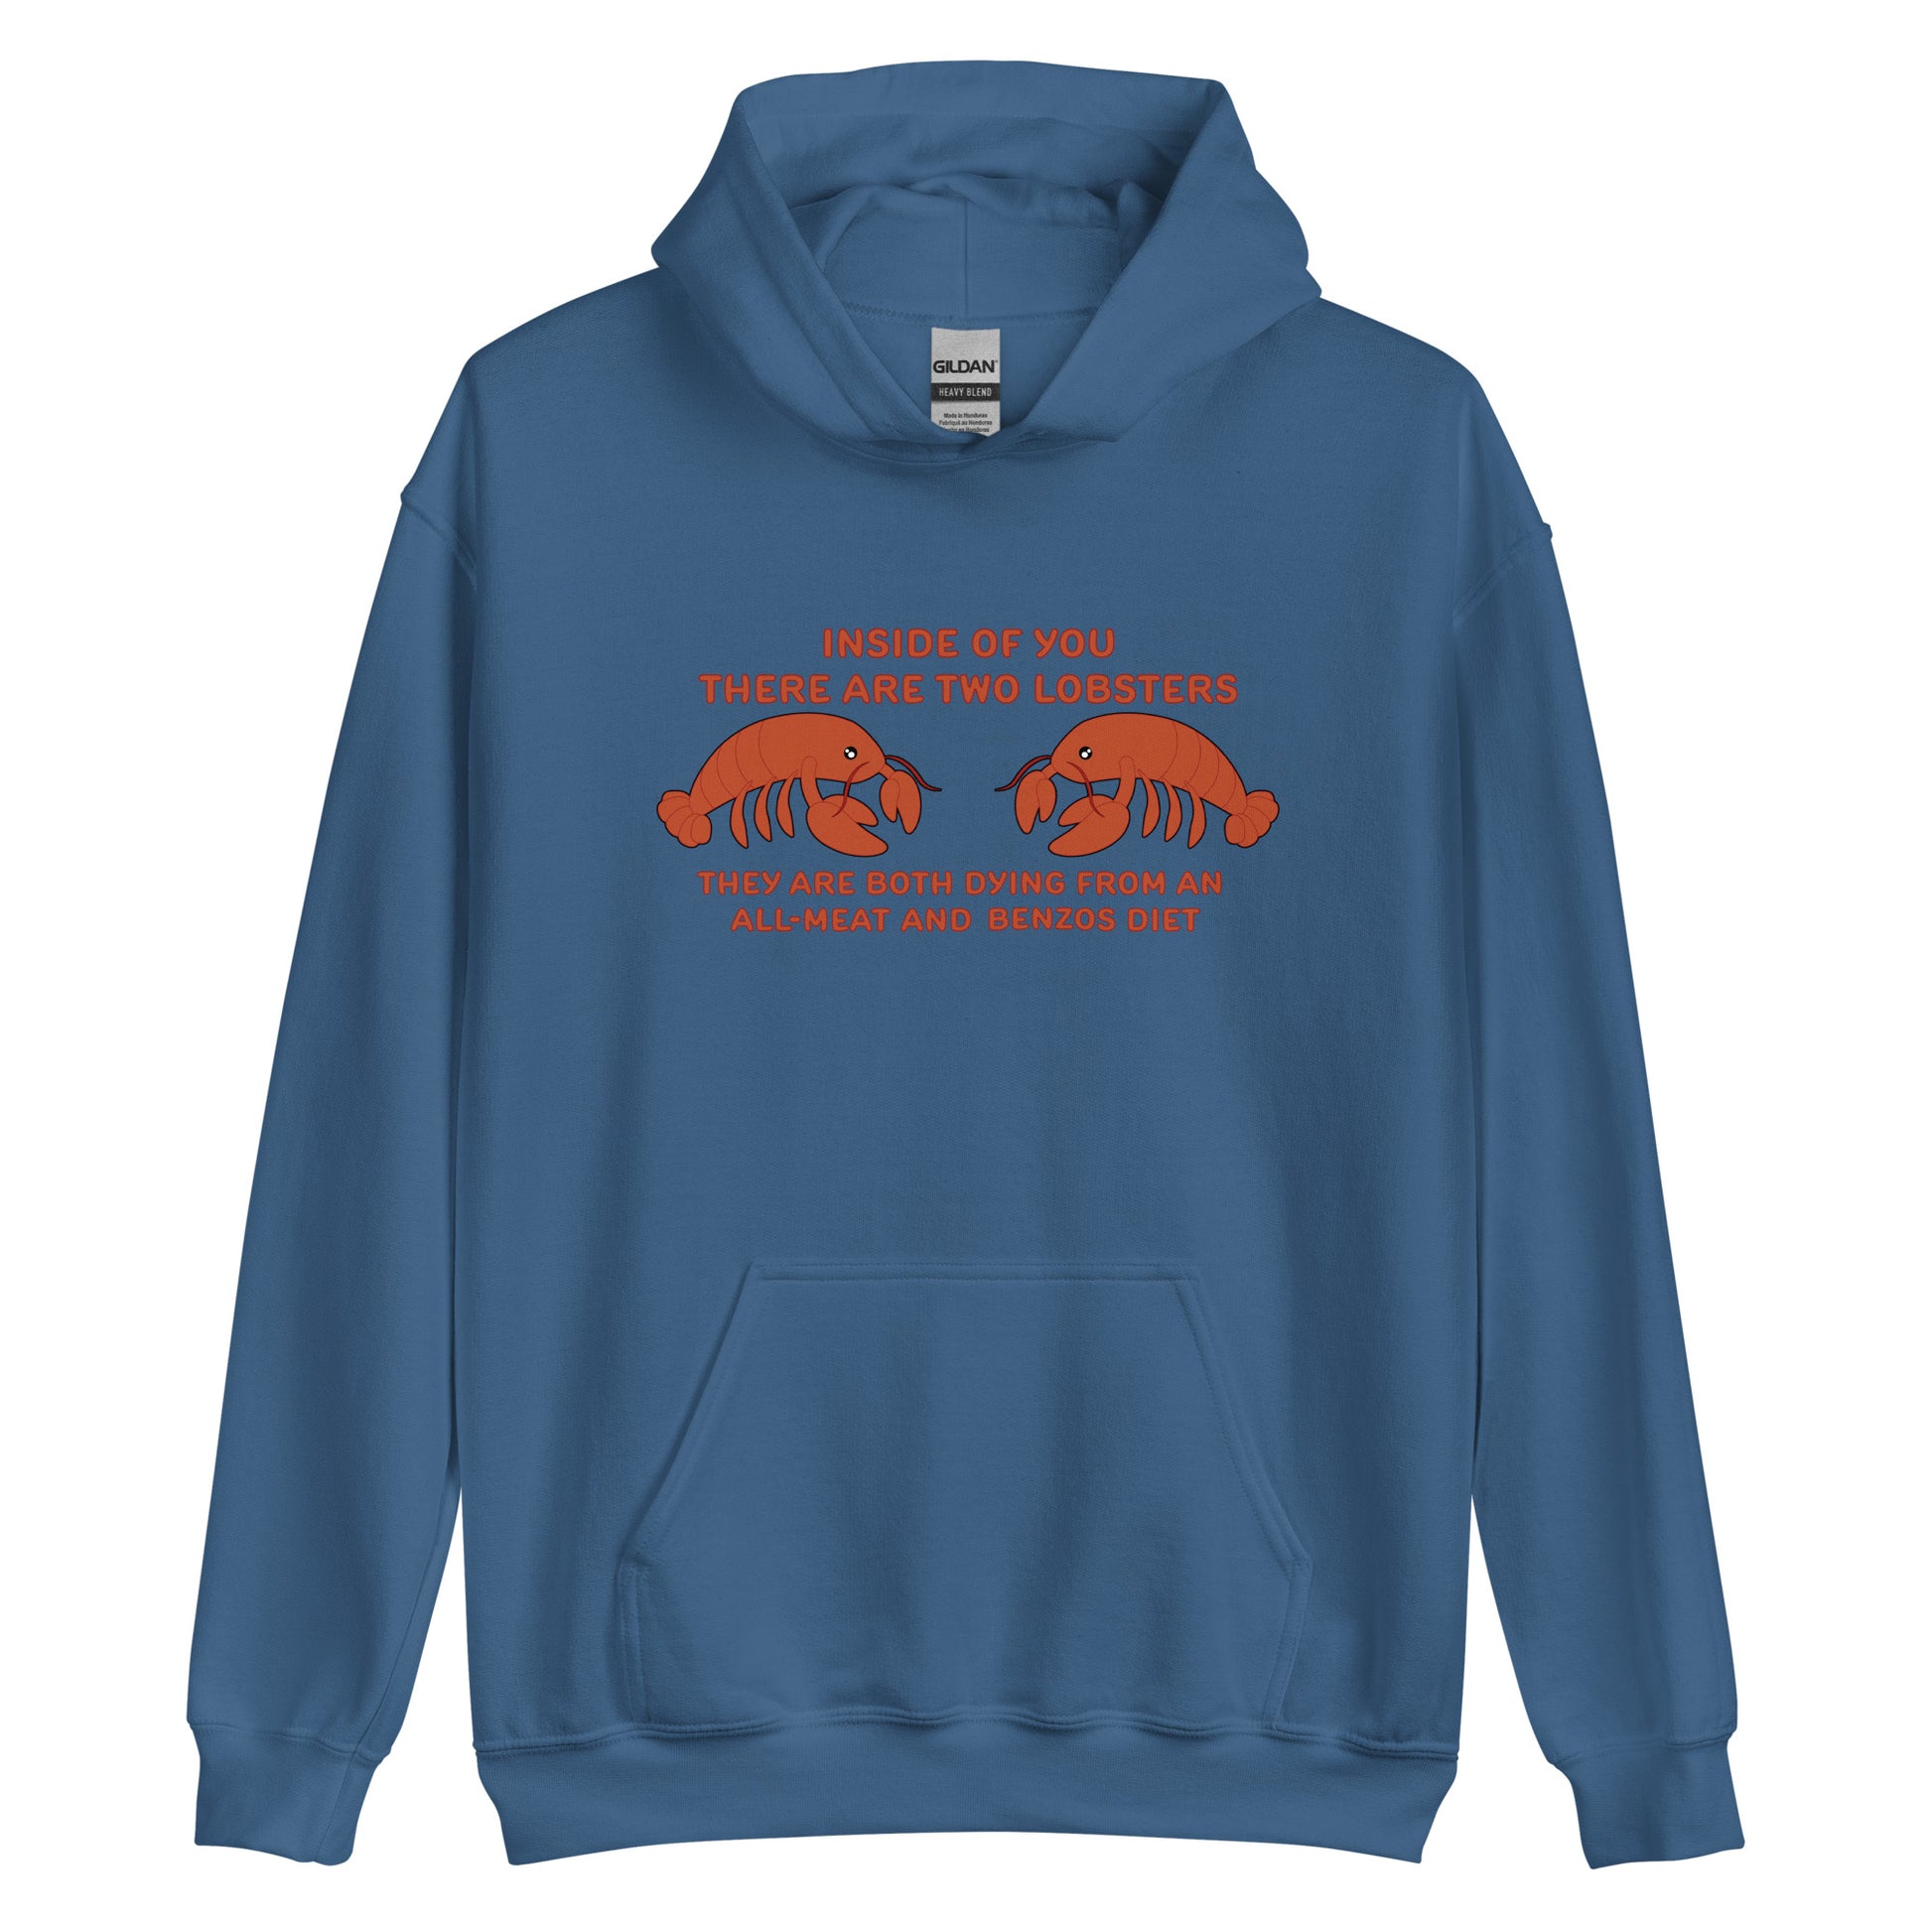 A blue hooded sweatshirt featuring an illustration of two lobsters. Text around the lobster reads "Inside Of You There Are Two Lobsters" "They are both dying from an all-meat and benzos diet."